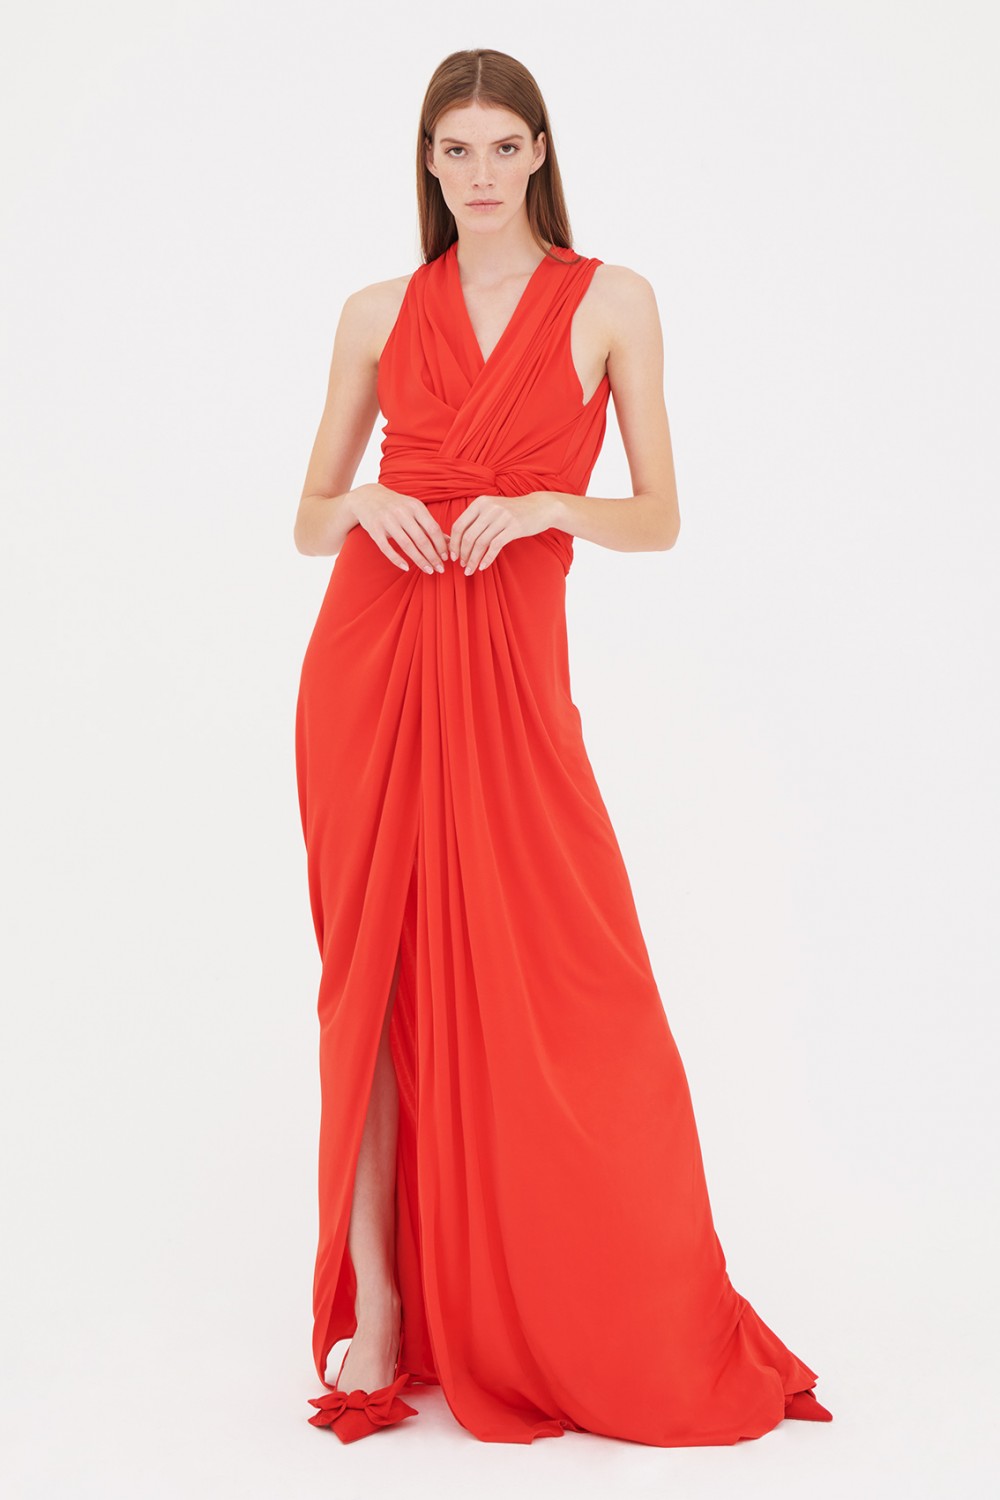 Silk red dress with slit